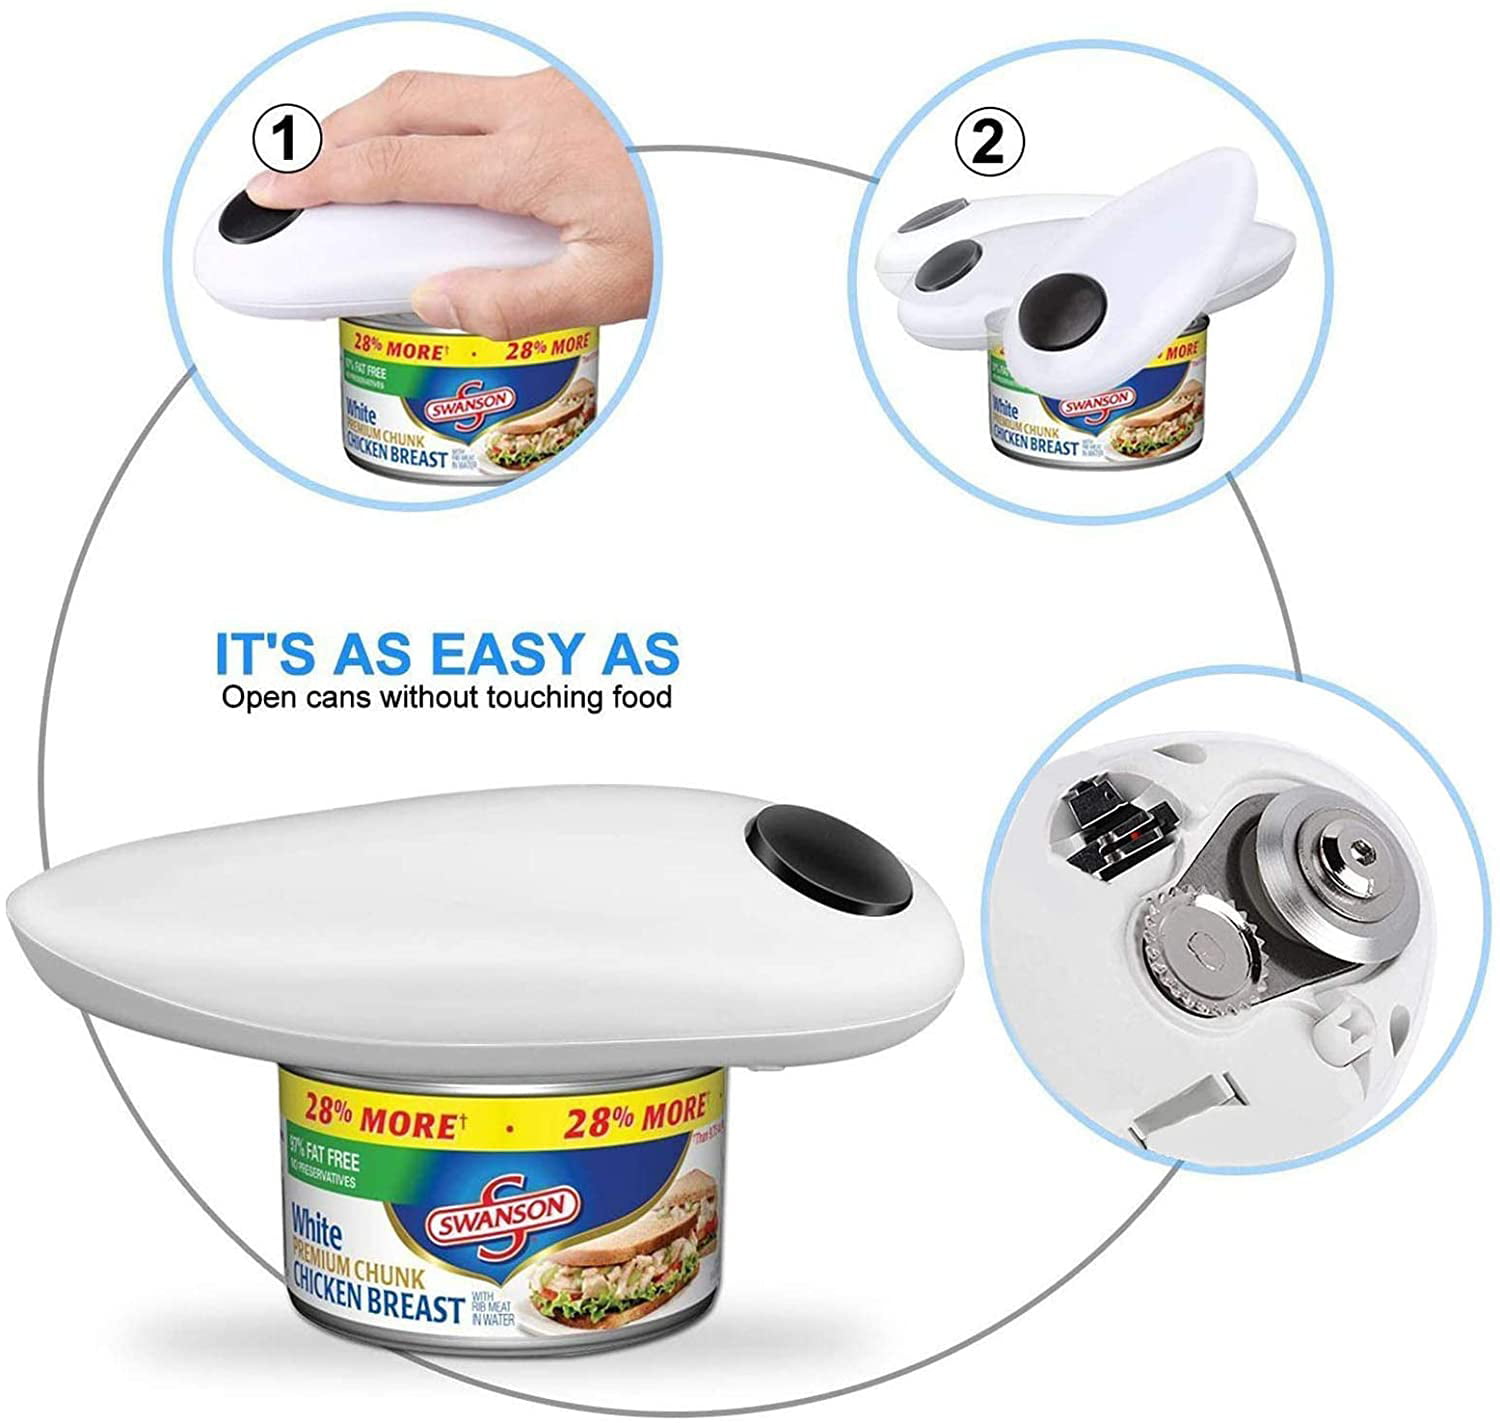 KingGardan Automatic Hands-Free Electric Can Opener with Smooth Edge and  Safety Design, Battery Operated Can Opener for Seniors and Arthritis